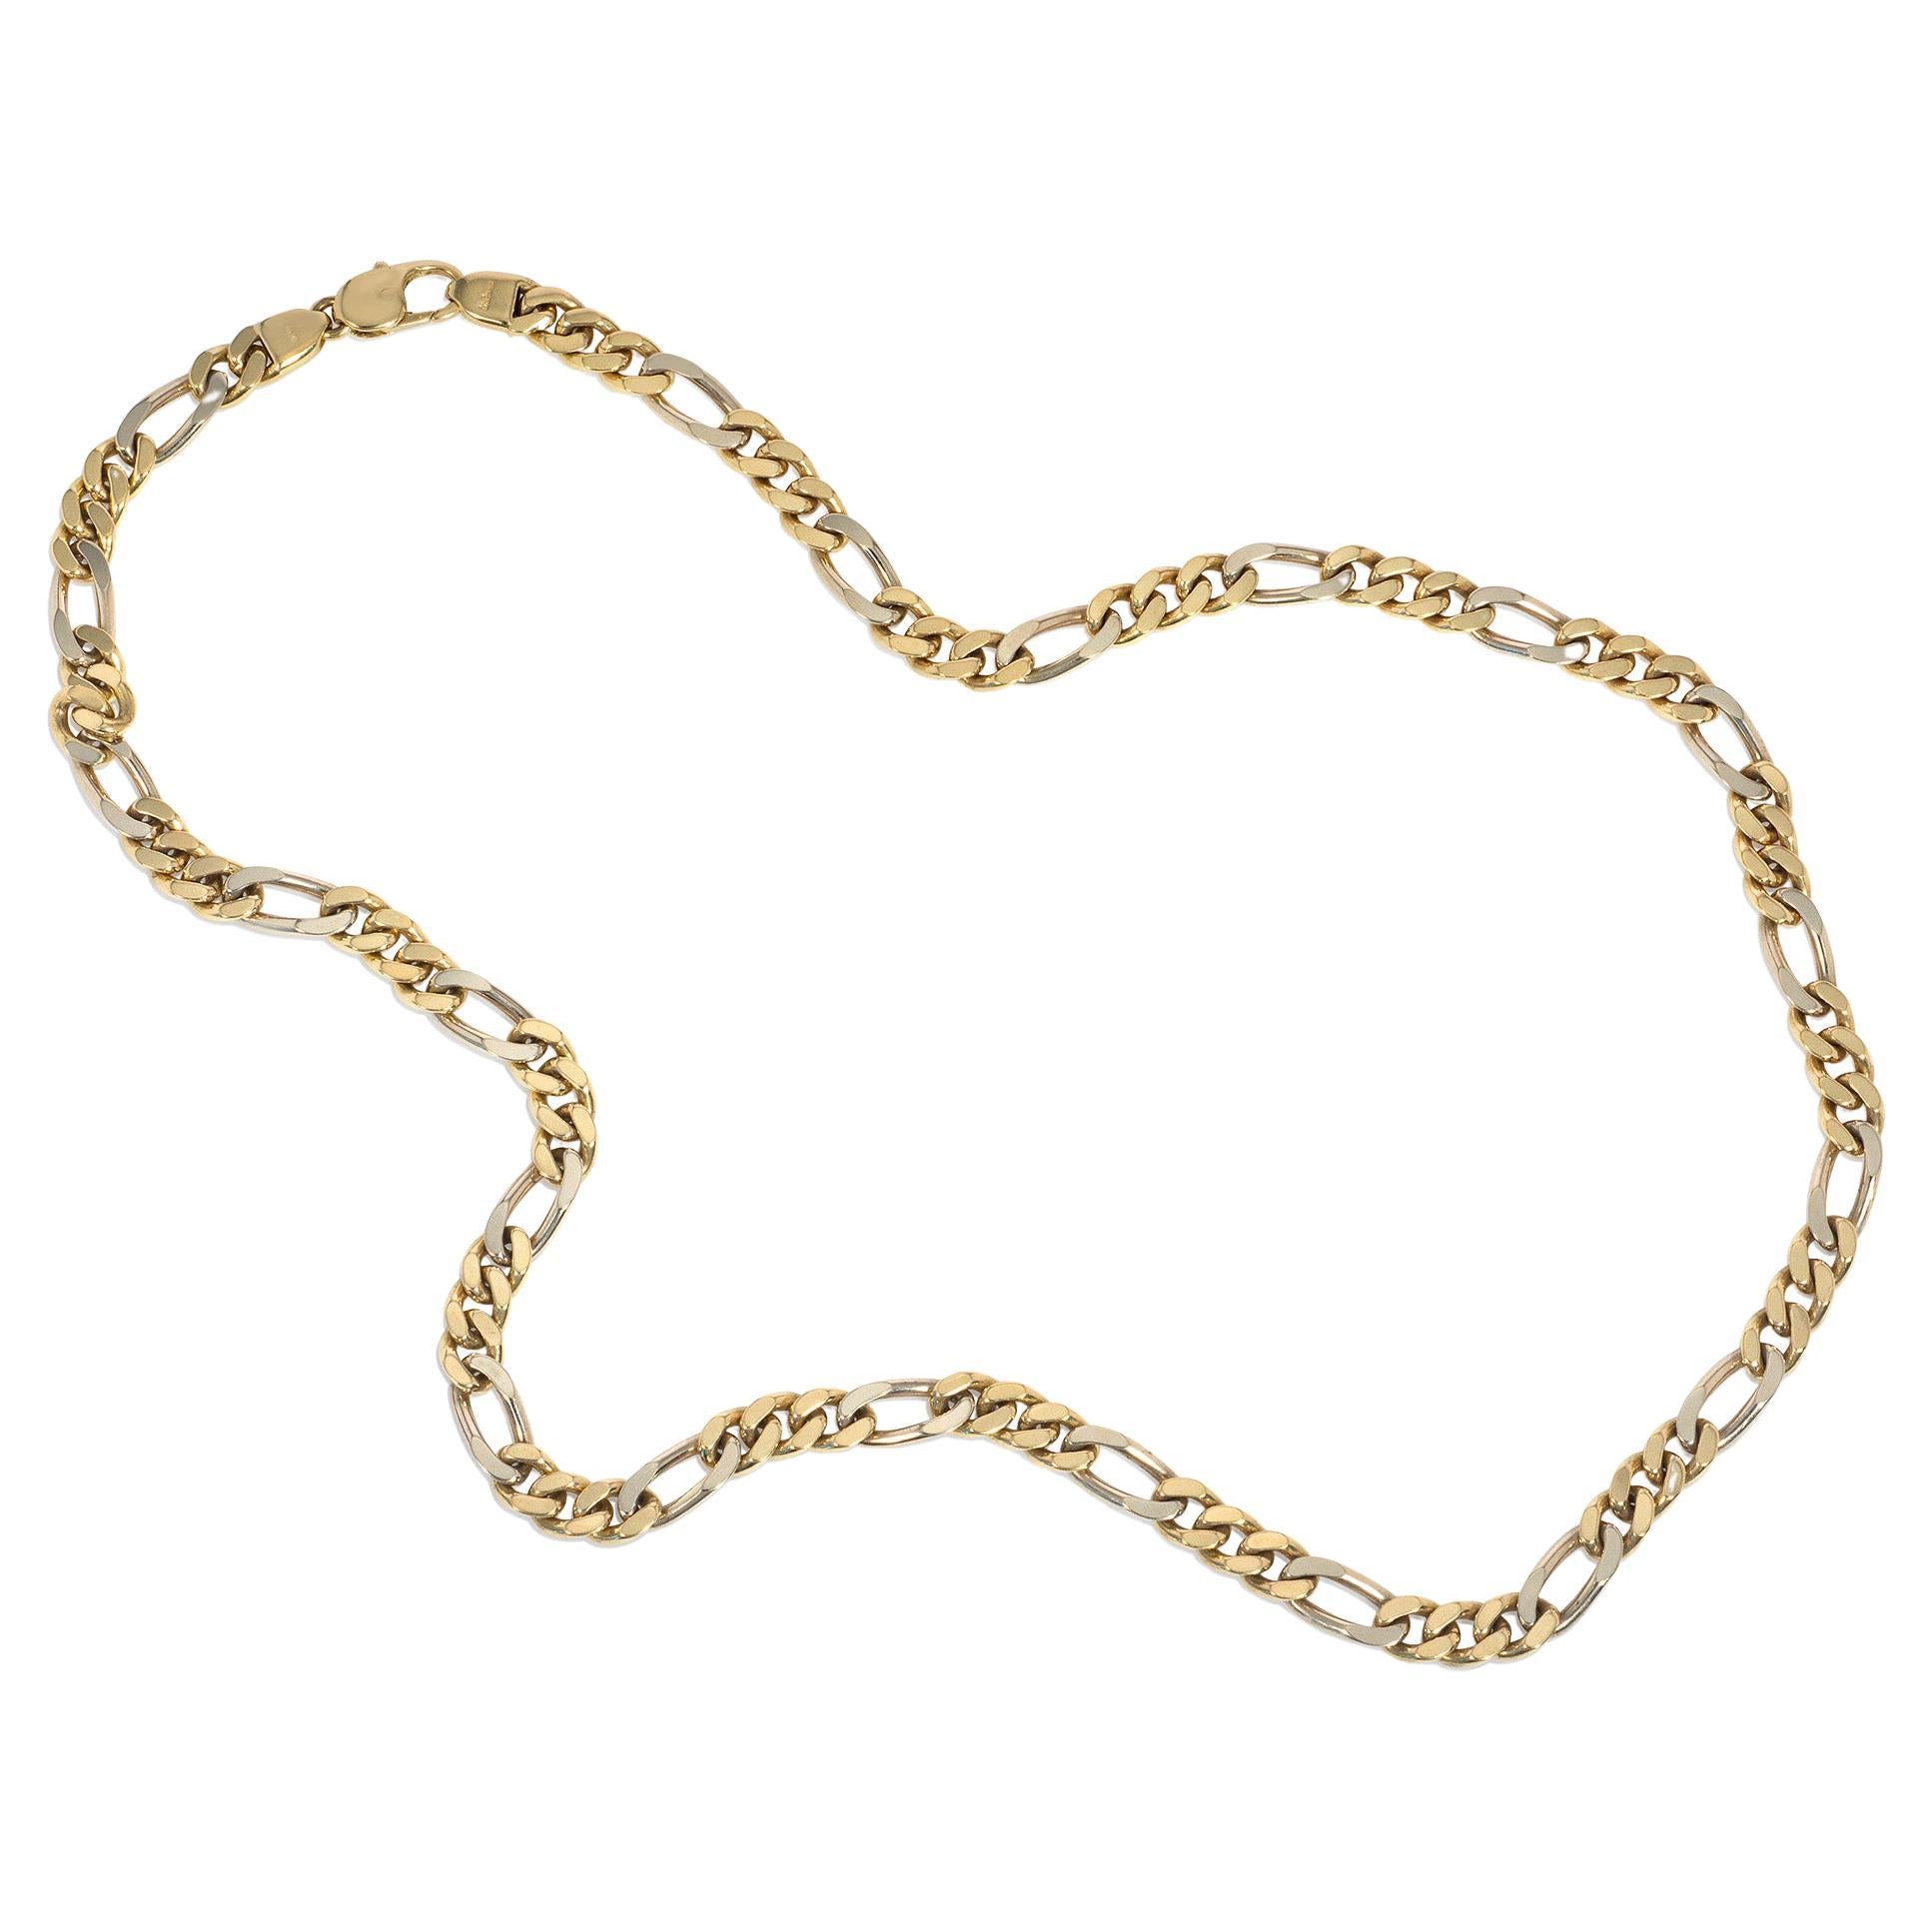 An estate two-color gold figaro link chain necklace, in 18k. Urbano, Italy.